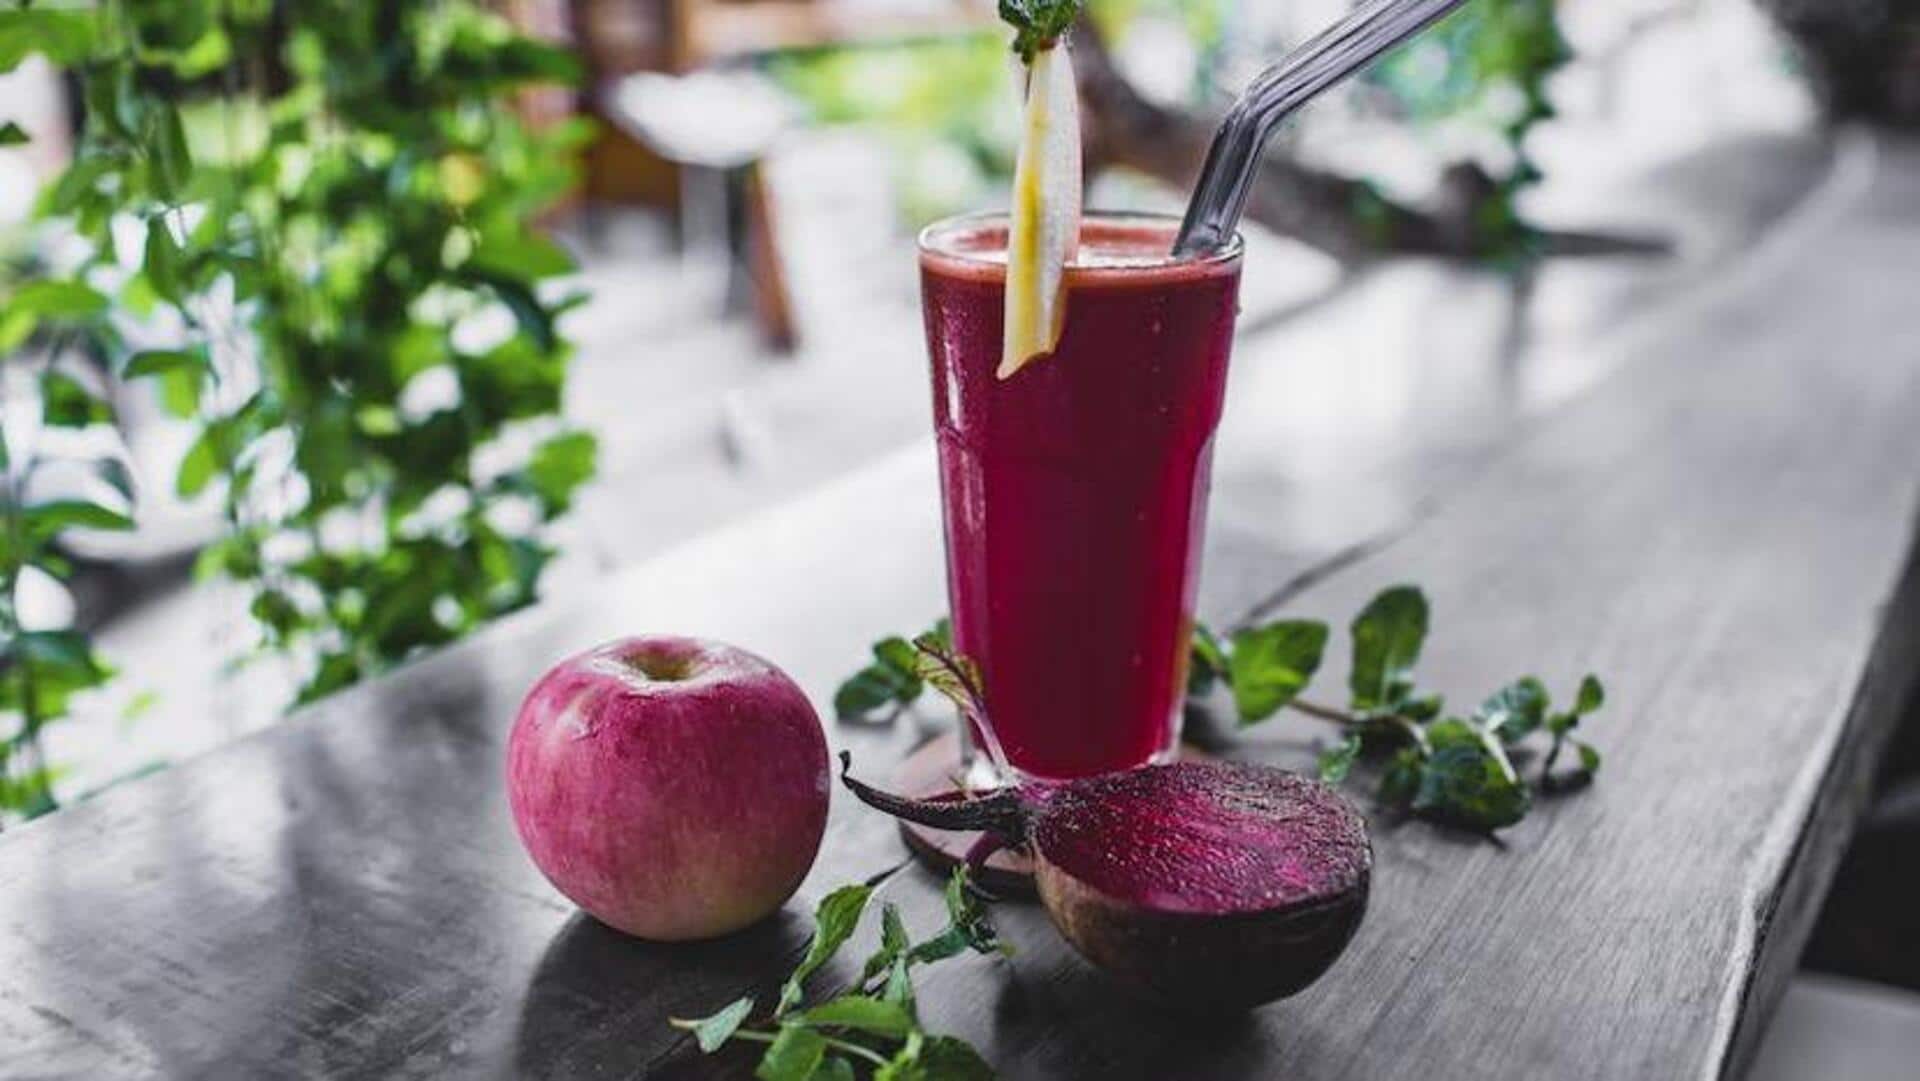 Here's why you should drink beetroot juice before your workout